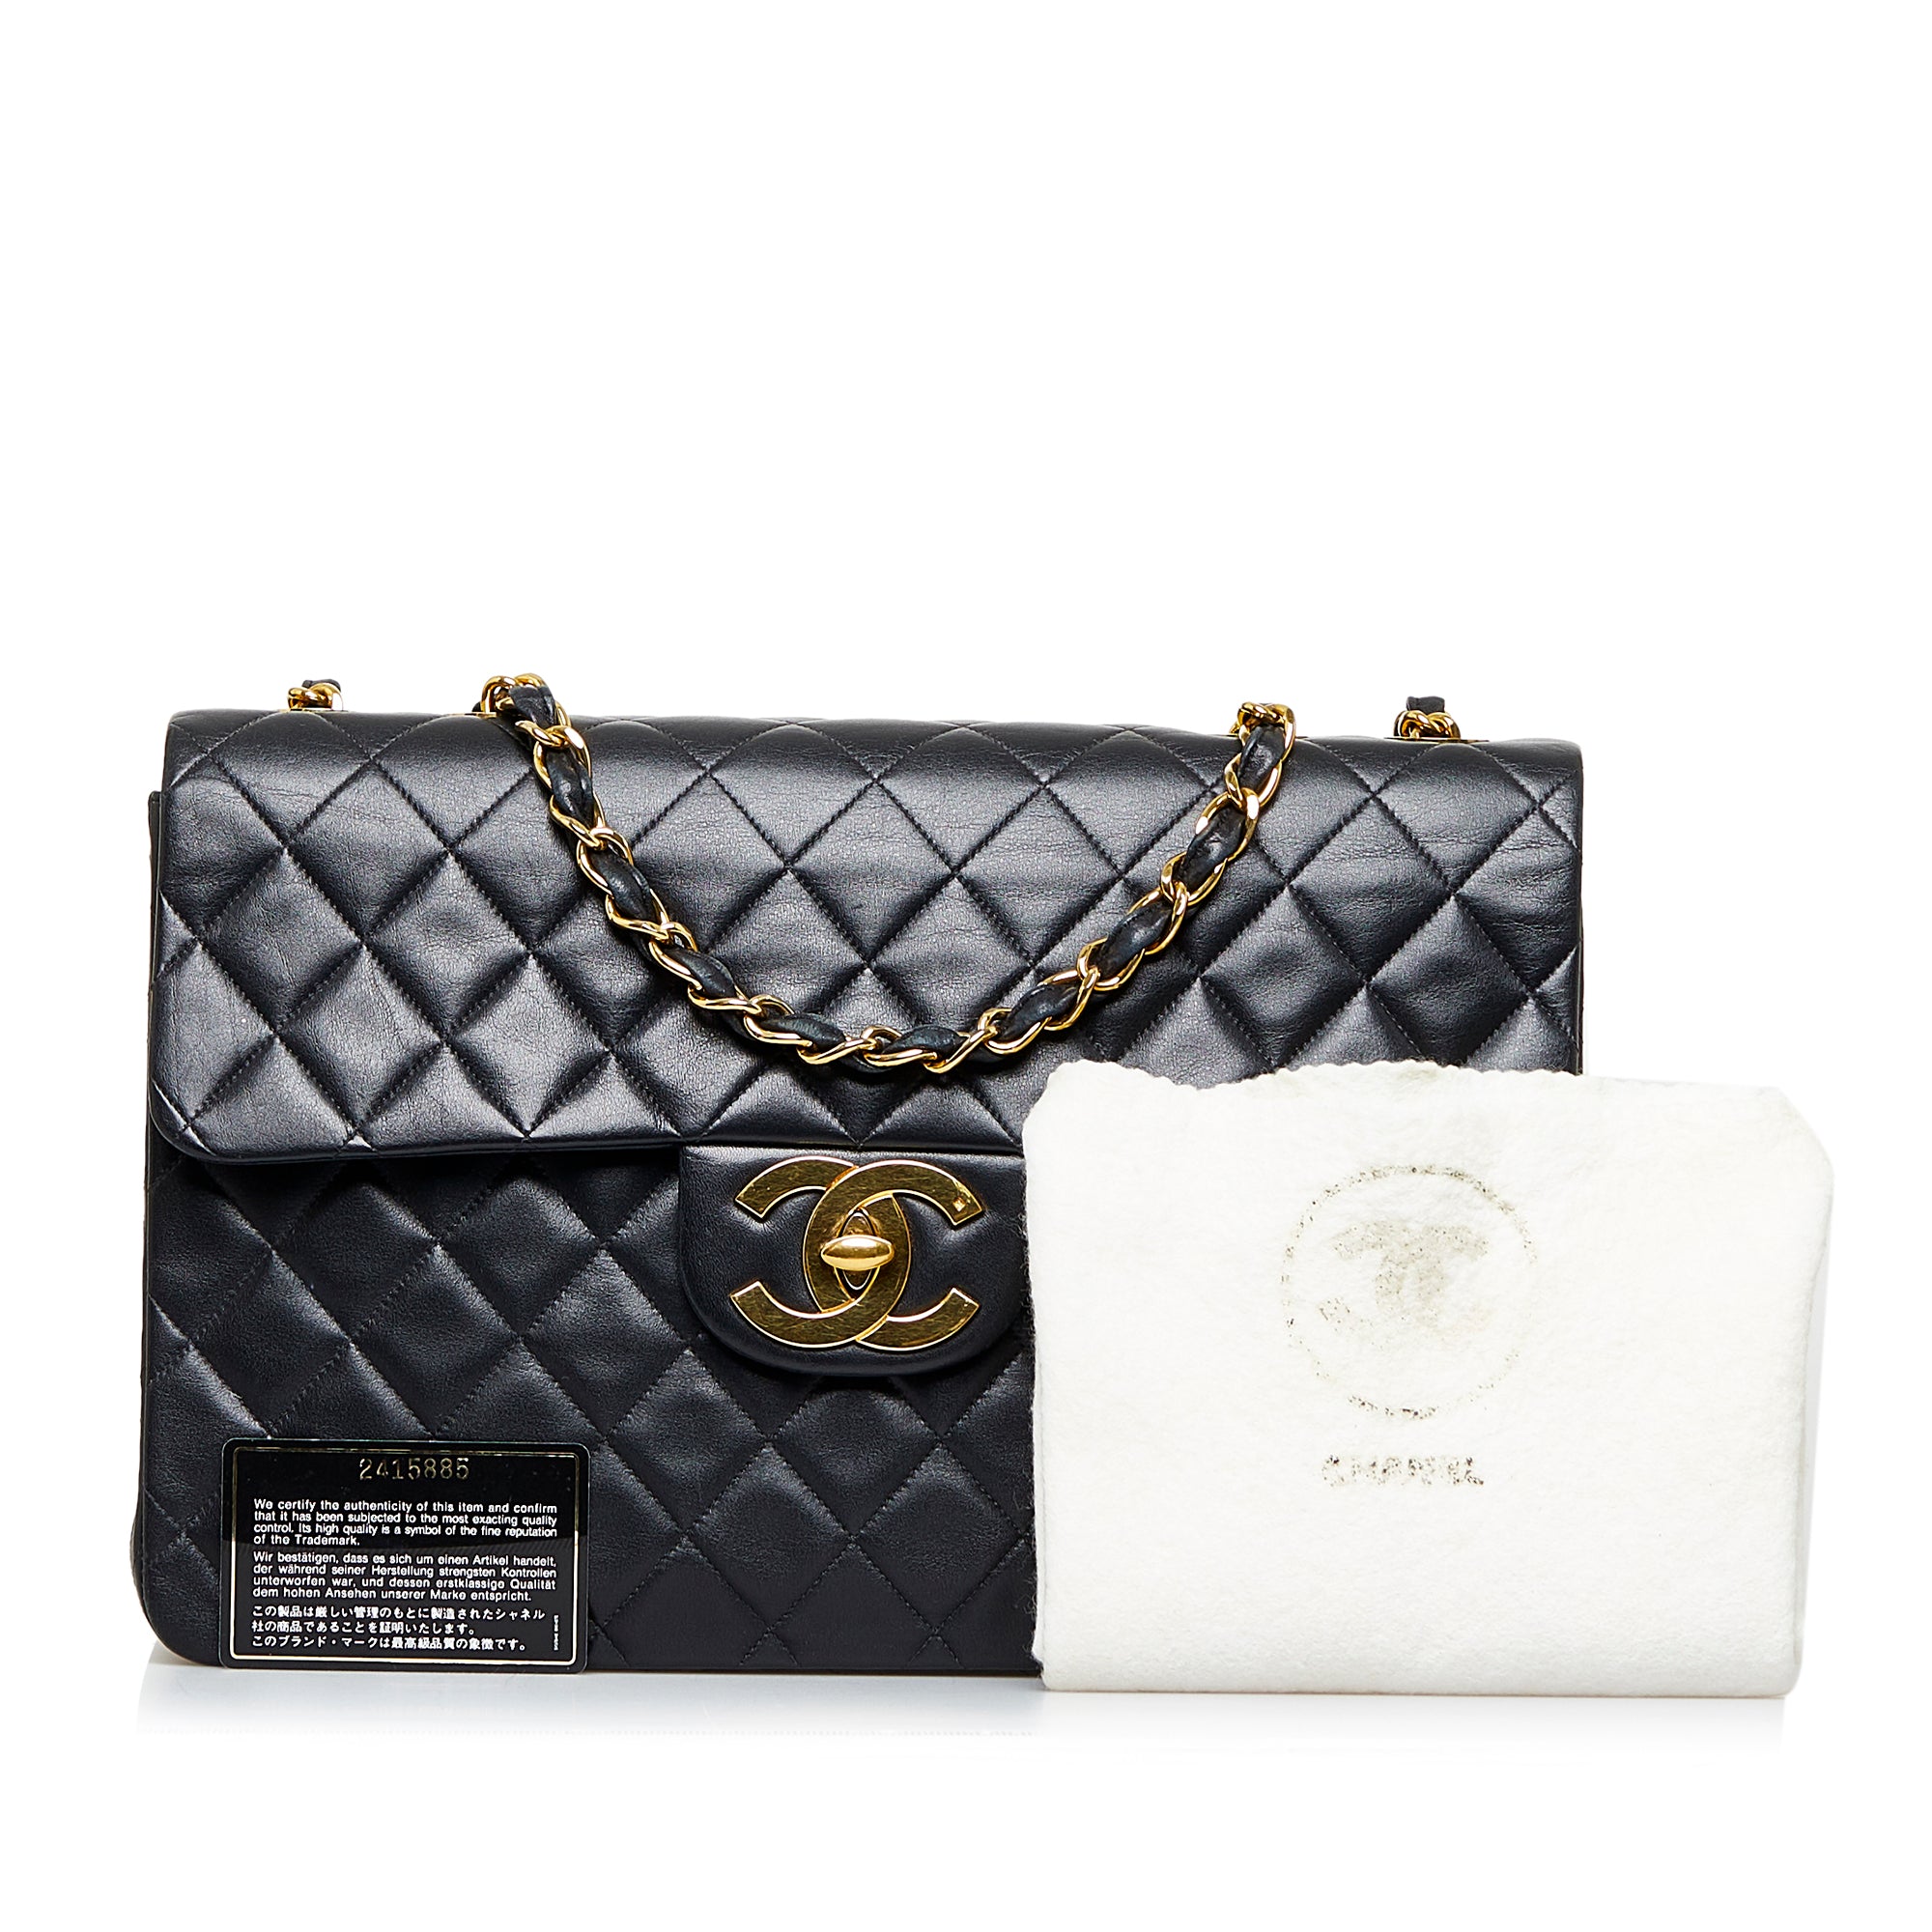 Sold at Auction: Chanel Classic Double Flap Bag Quilted Lambskin Maxi Gray,  Metallic